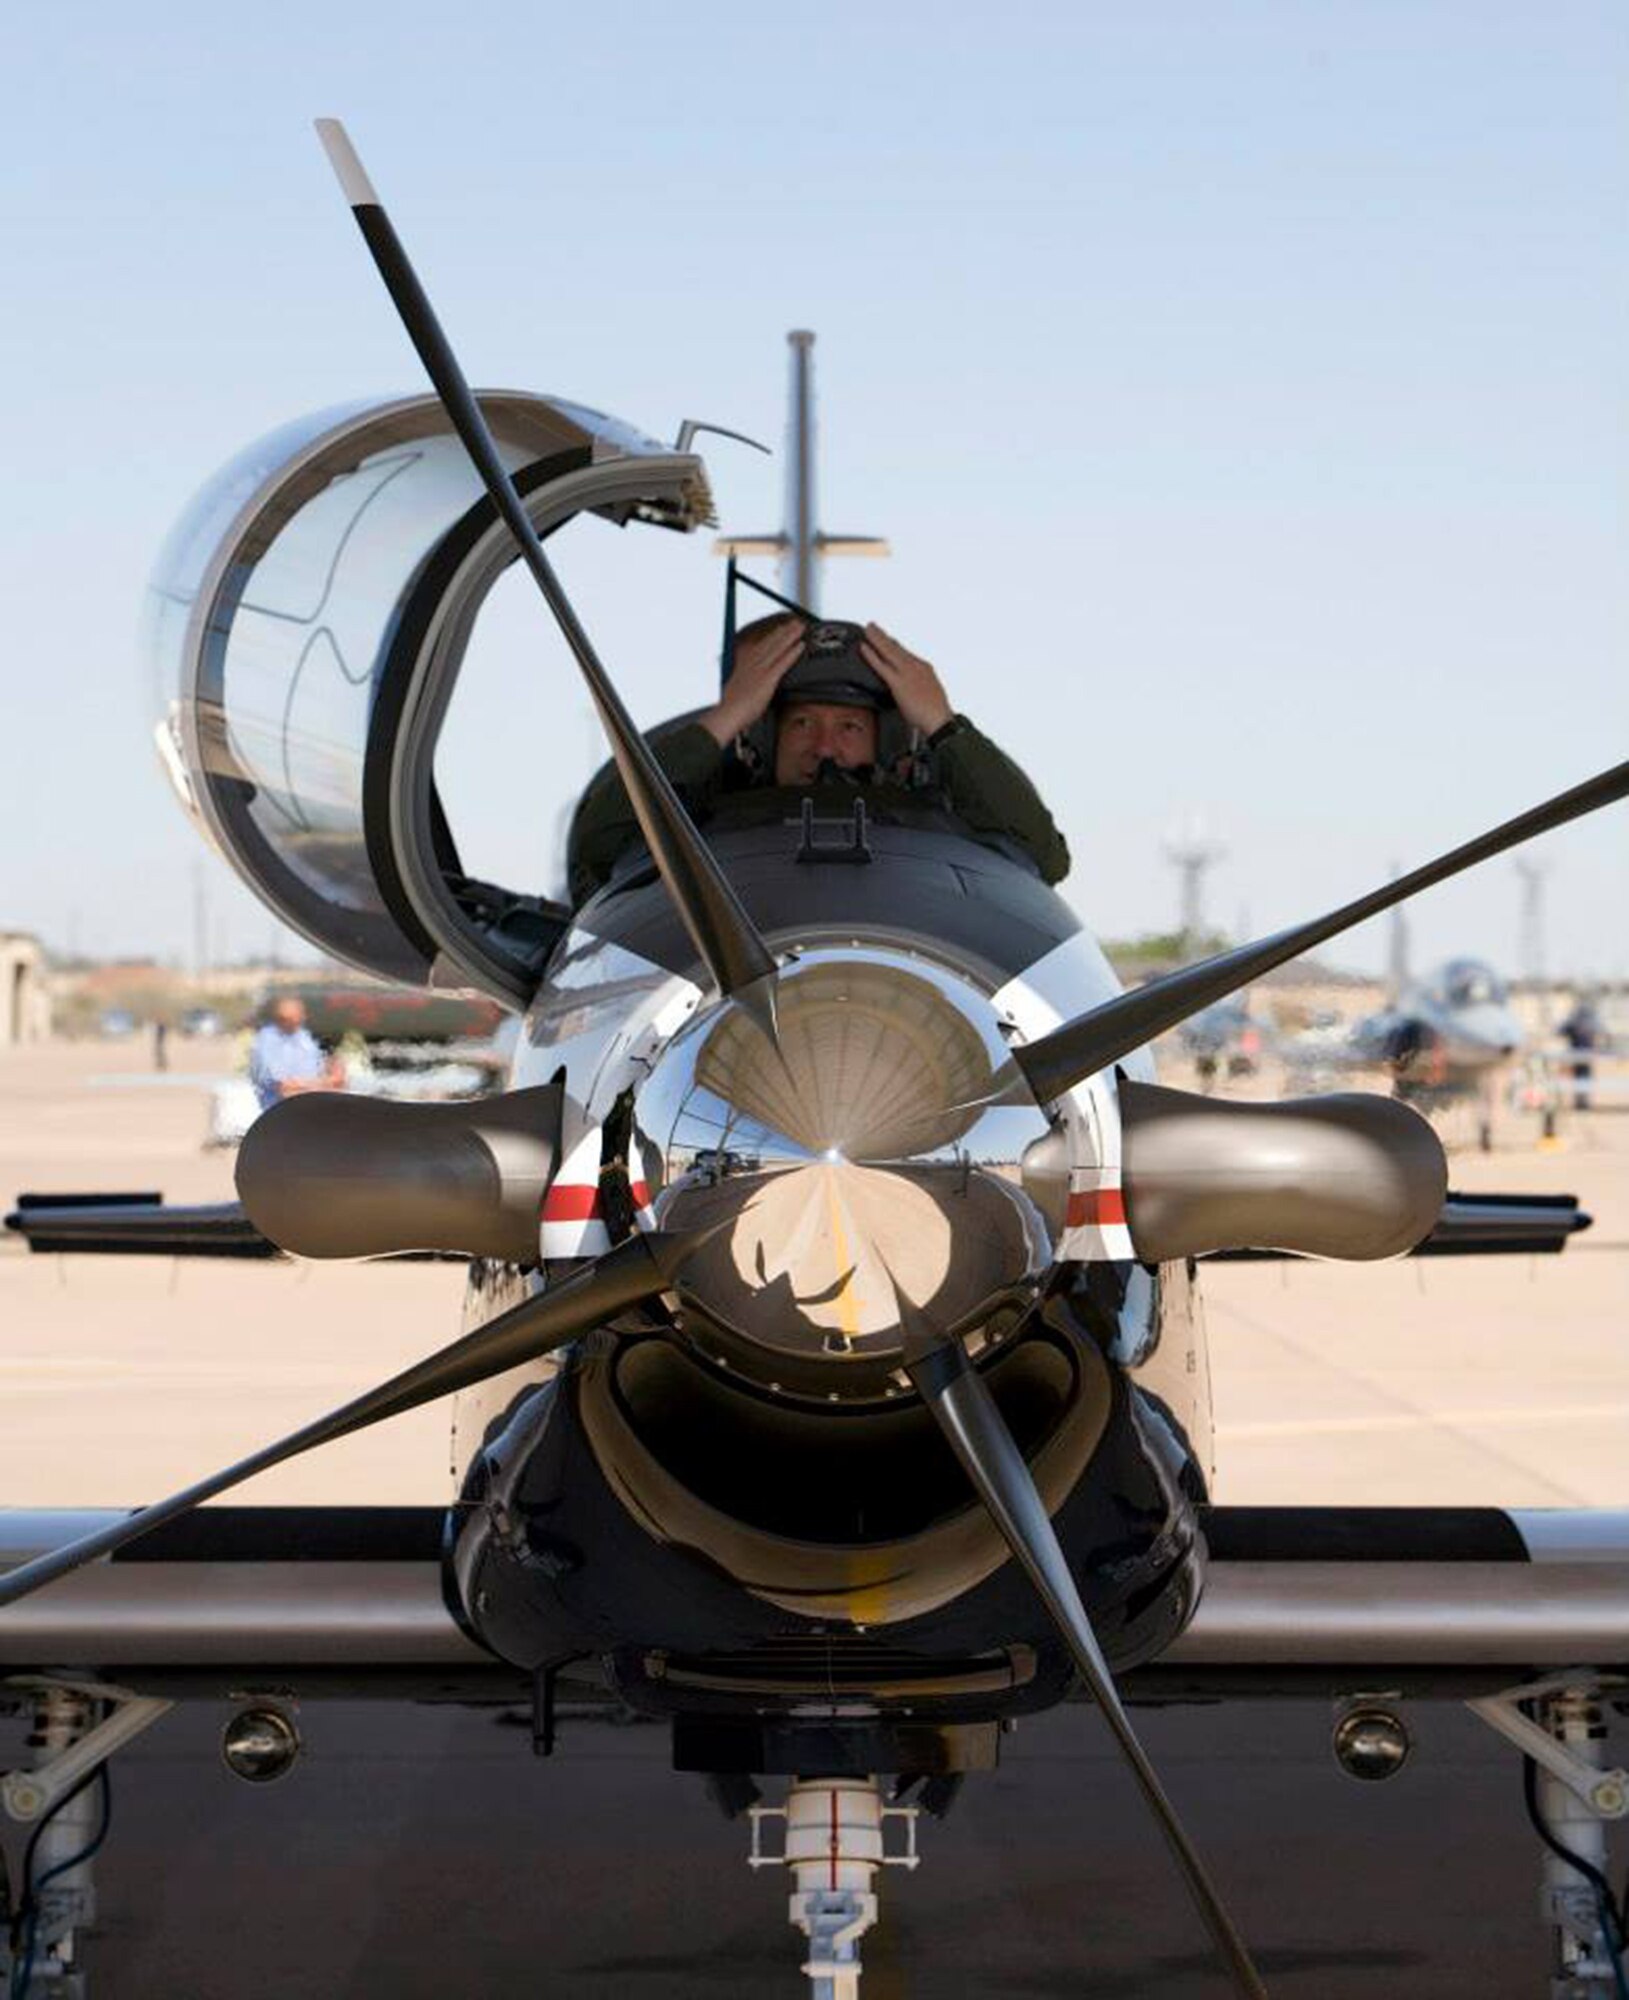 A Euro-NATO Joint Jet Pilot Training student pilot prepares for takeoff in a T-6 at Sheppard Air Force Base, Texas. ENJJPT is the only internationally manned and managed pilot training program in the world, producing pilots for 13 NATO nations. For several nations, including Germany, ENJJPT is their sole source of training for fighter pilots. (U.S. Air Force photo/82nd Training Wing Public Affairs)